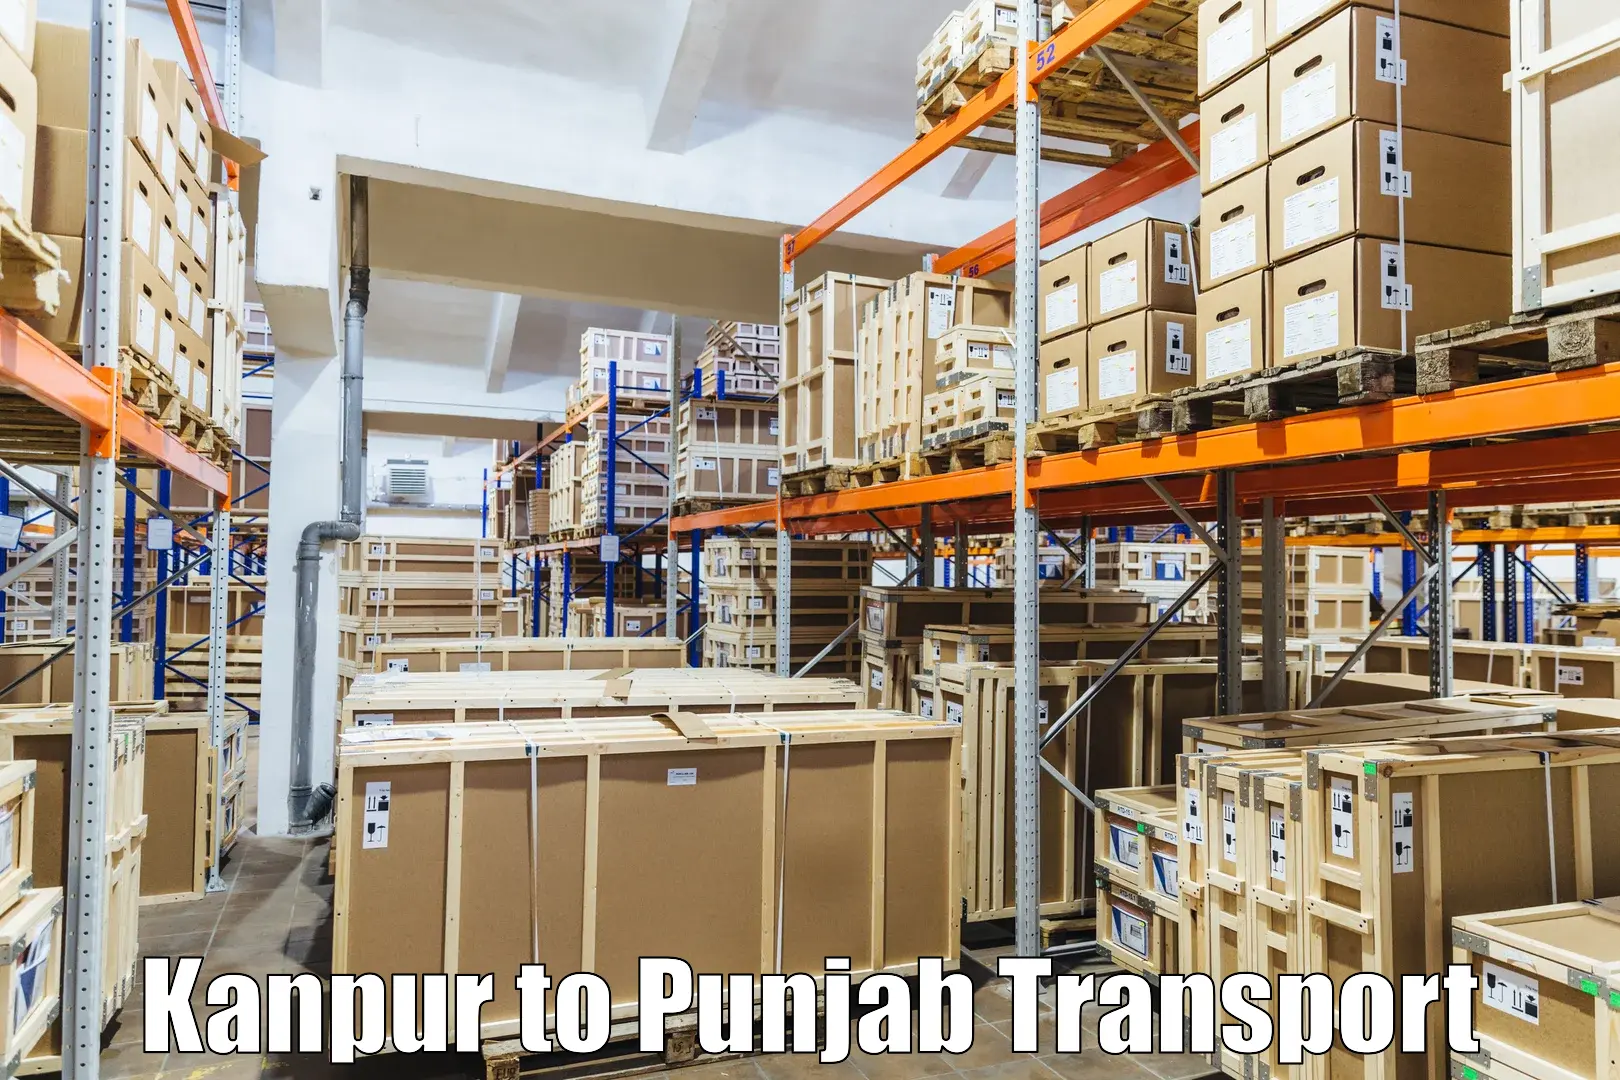 Vehicle transport services in Kanpur to Zirakpur